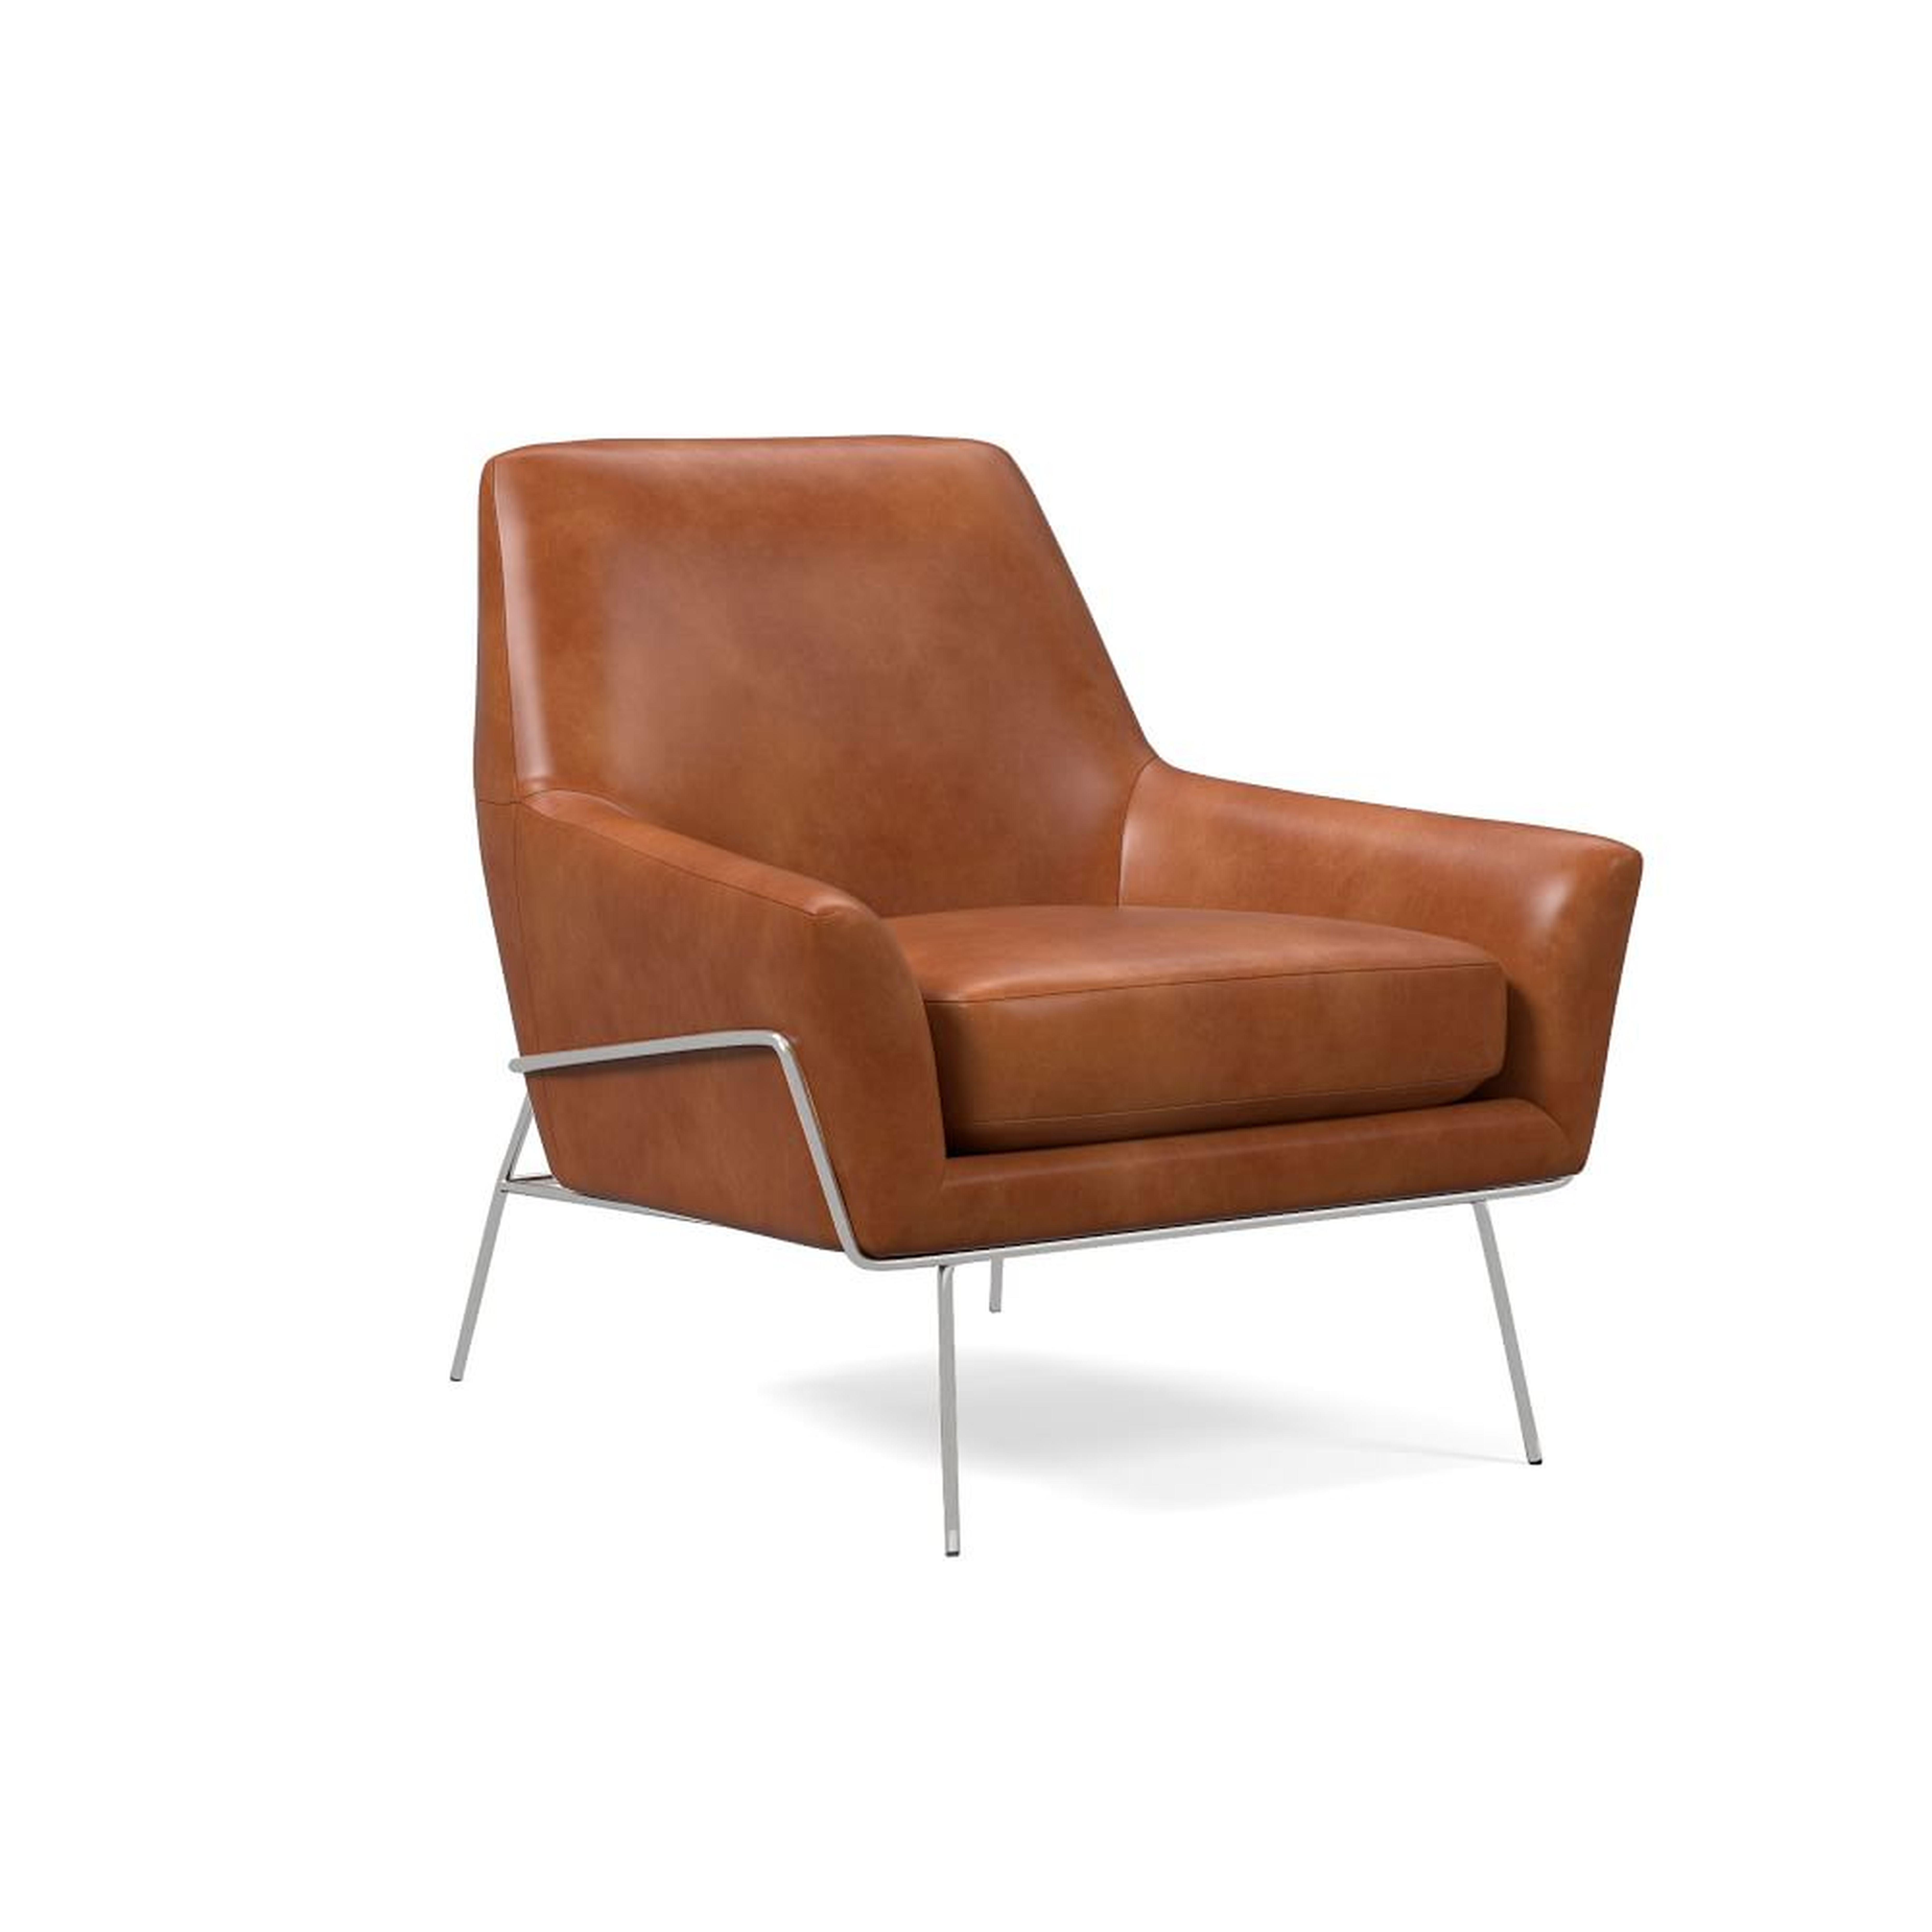 Lucas Wire Base Leather Chair, Poly, Vegan Leather, Saddle, Polished Nickel - West Elm